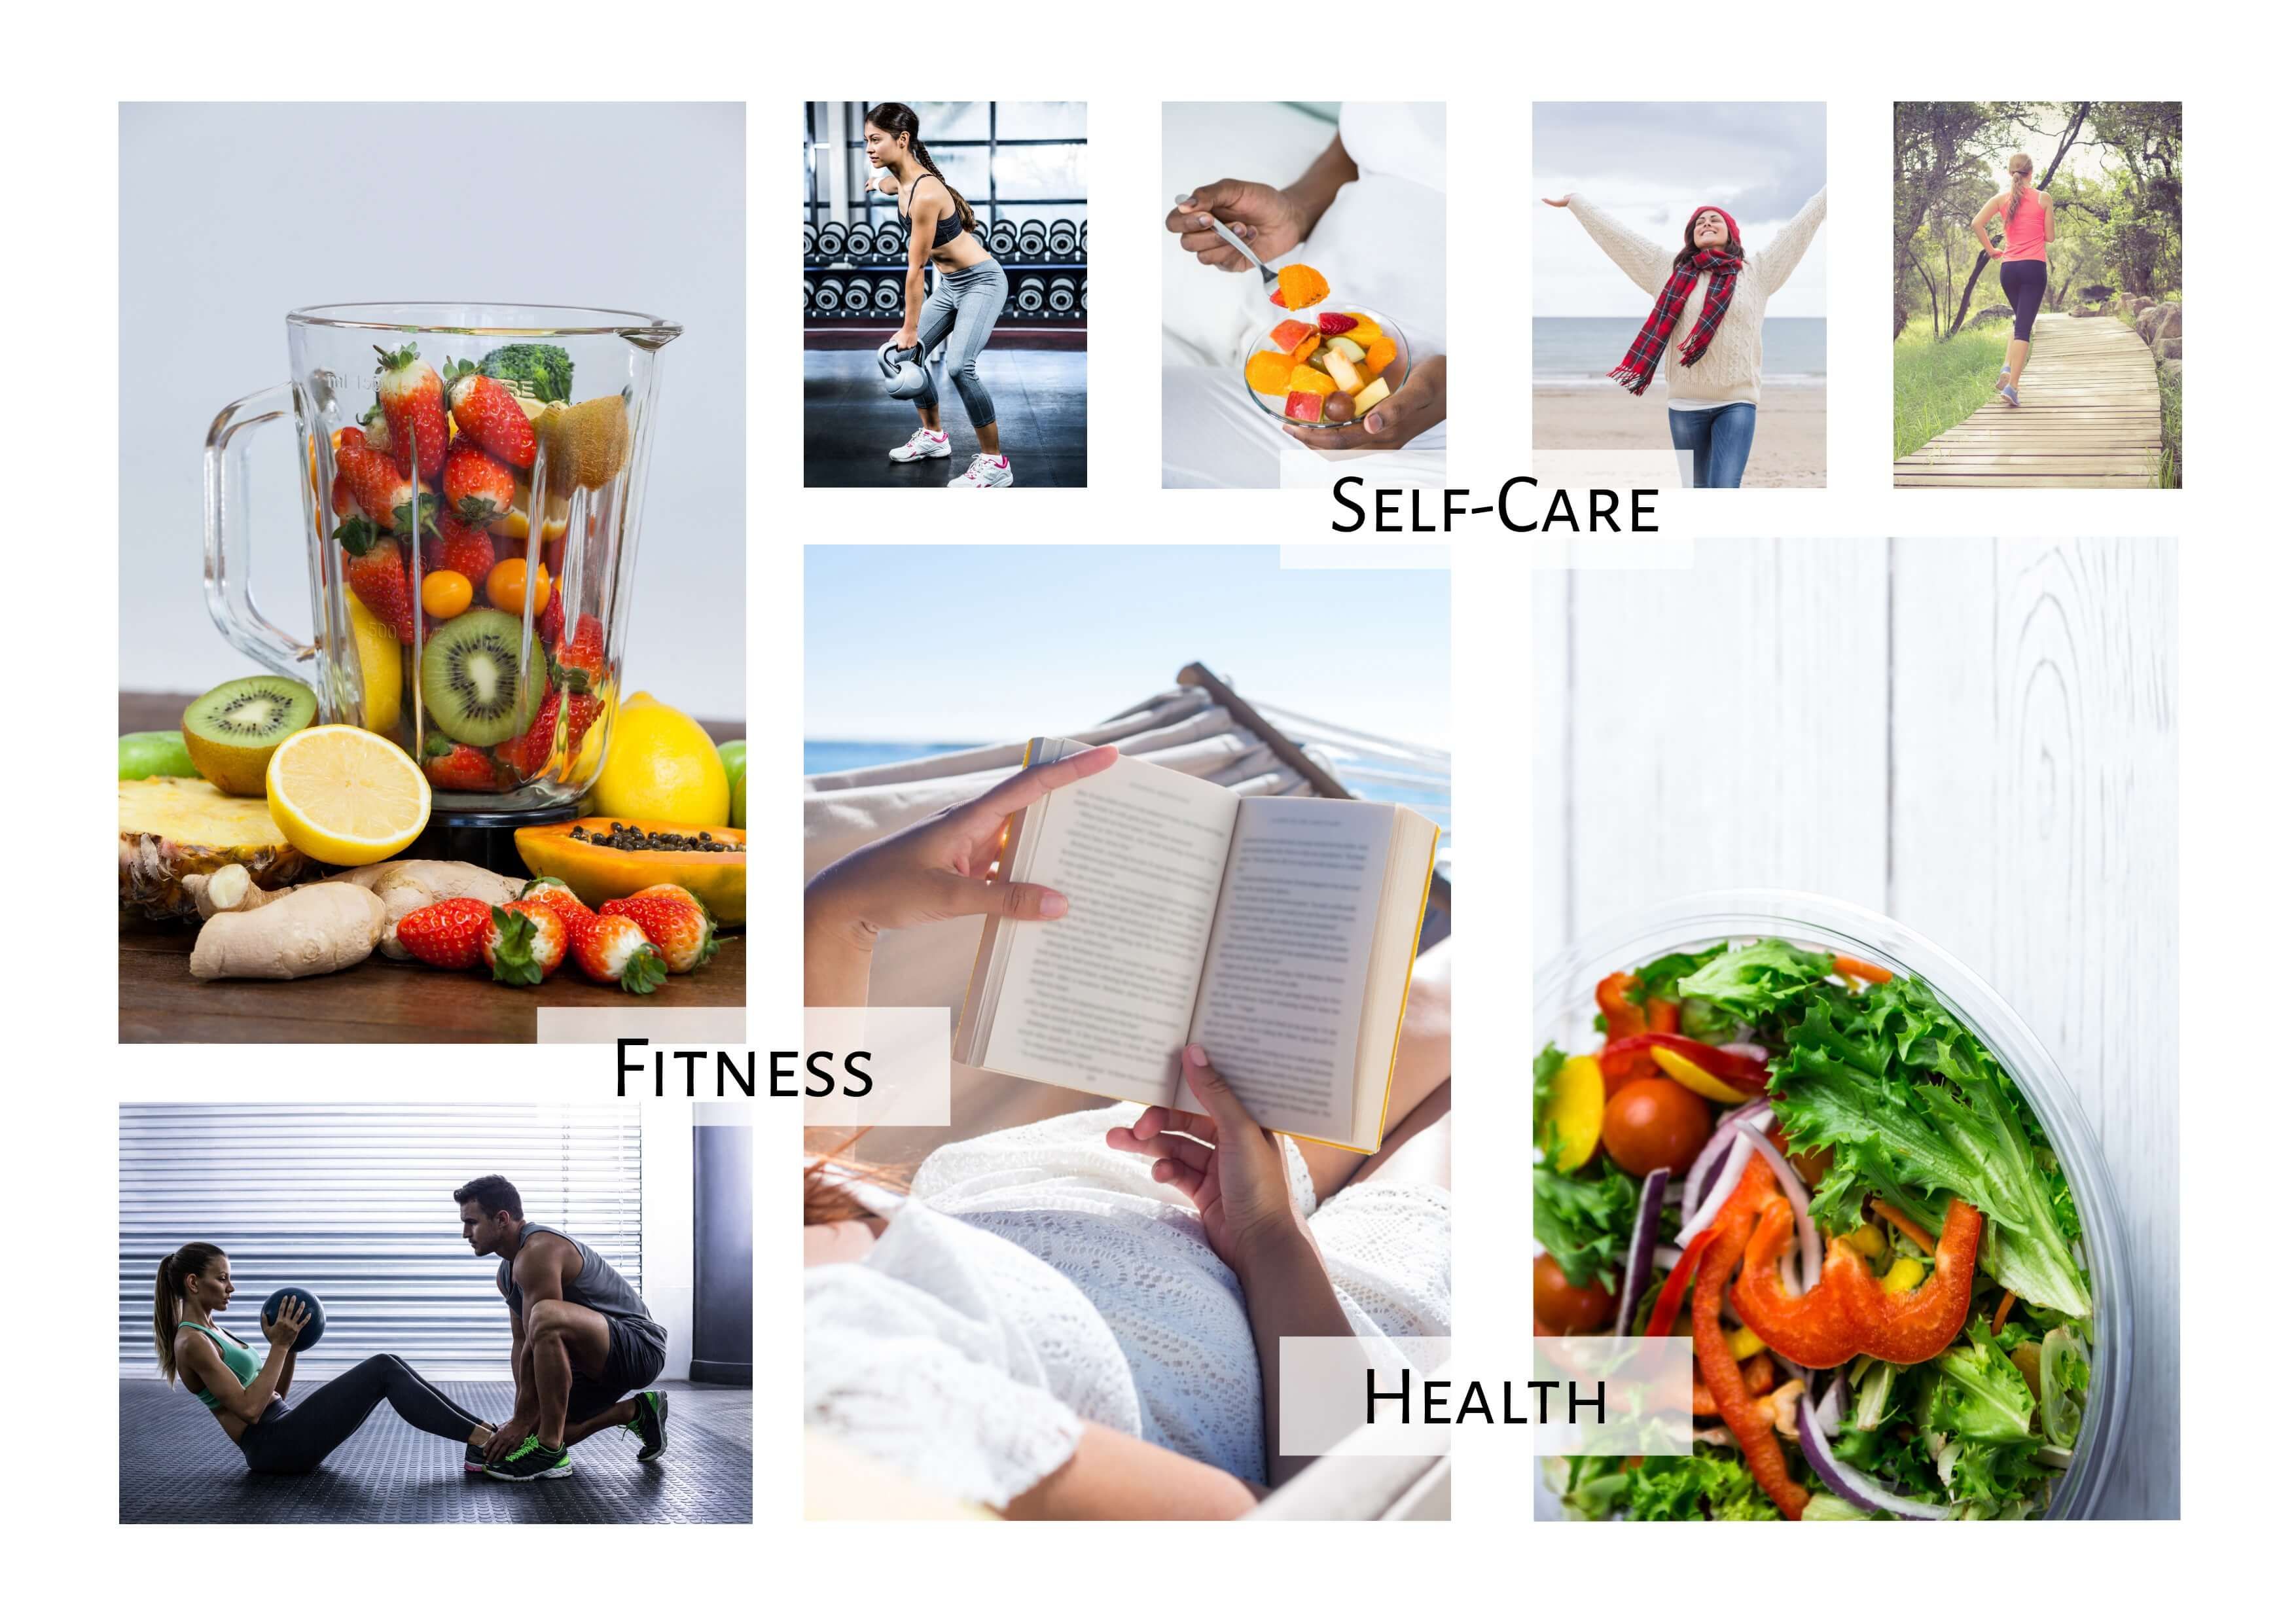 Healthy lifestyle vision board - Track your healthy lifestyle goals with Design Wizard's lifestyle-related vision board templates - Image